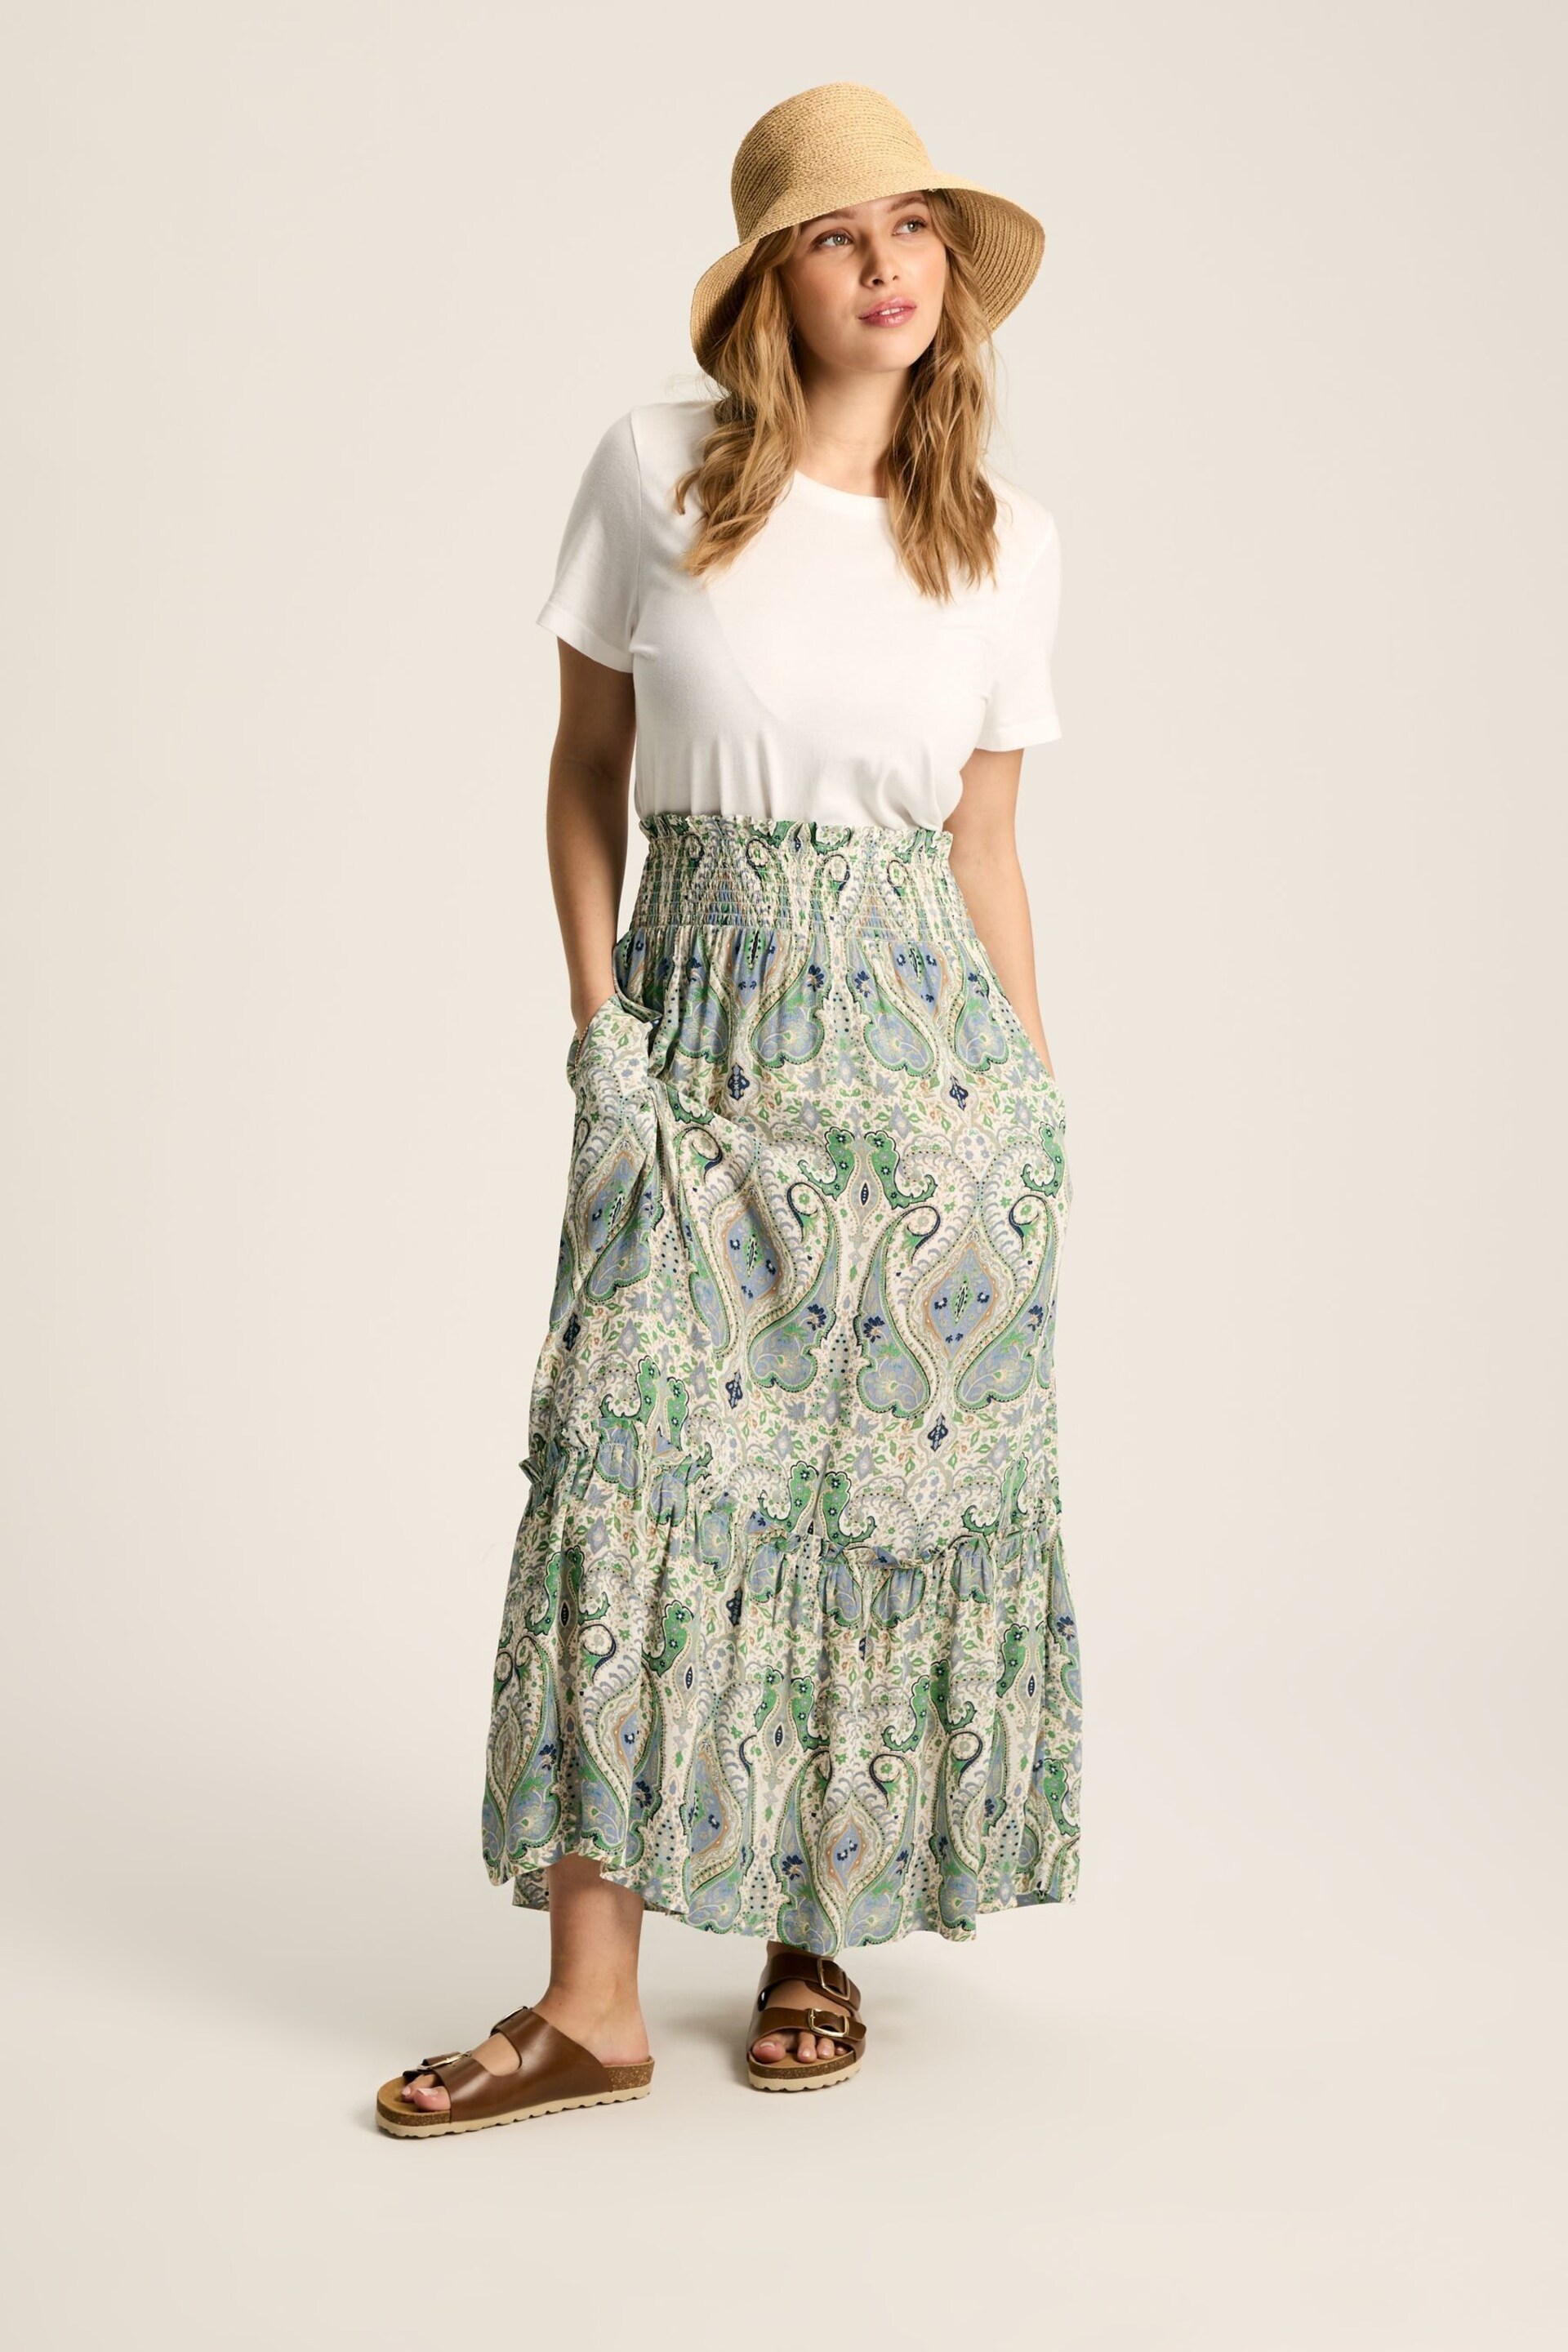 Joules Verity Blue & Green Tiered Skirt - Image 4 of 7